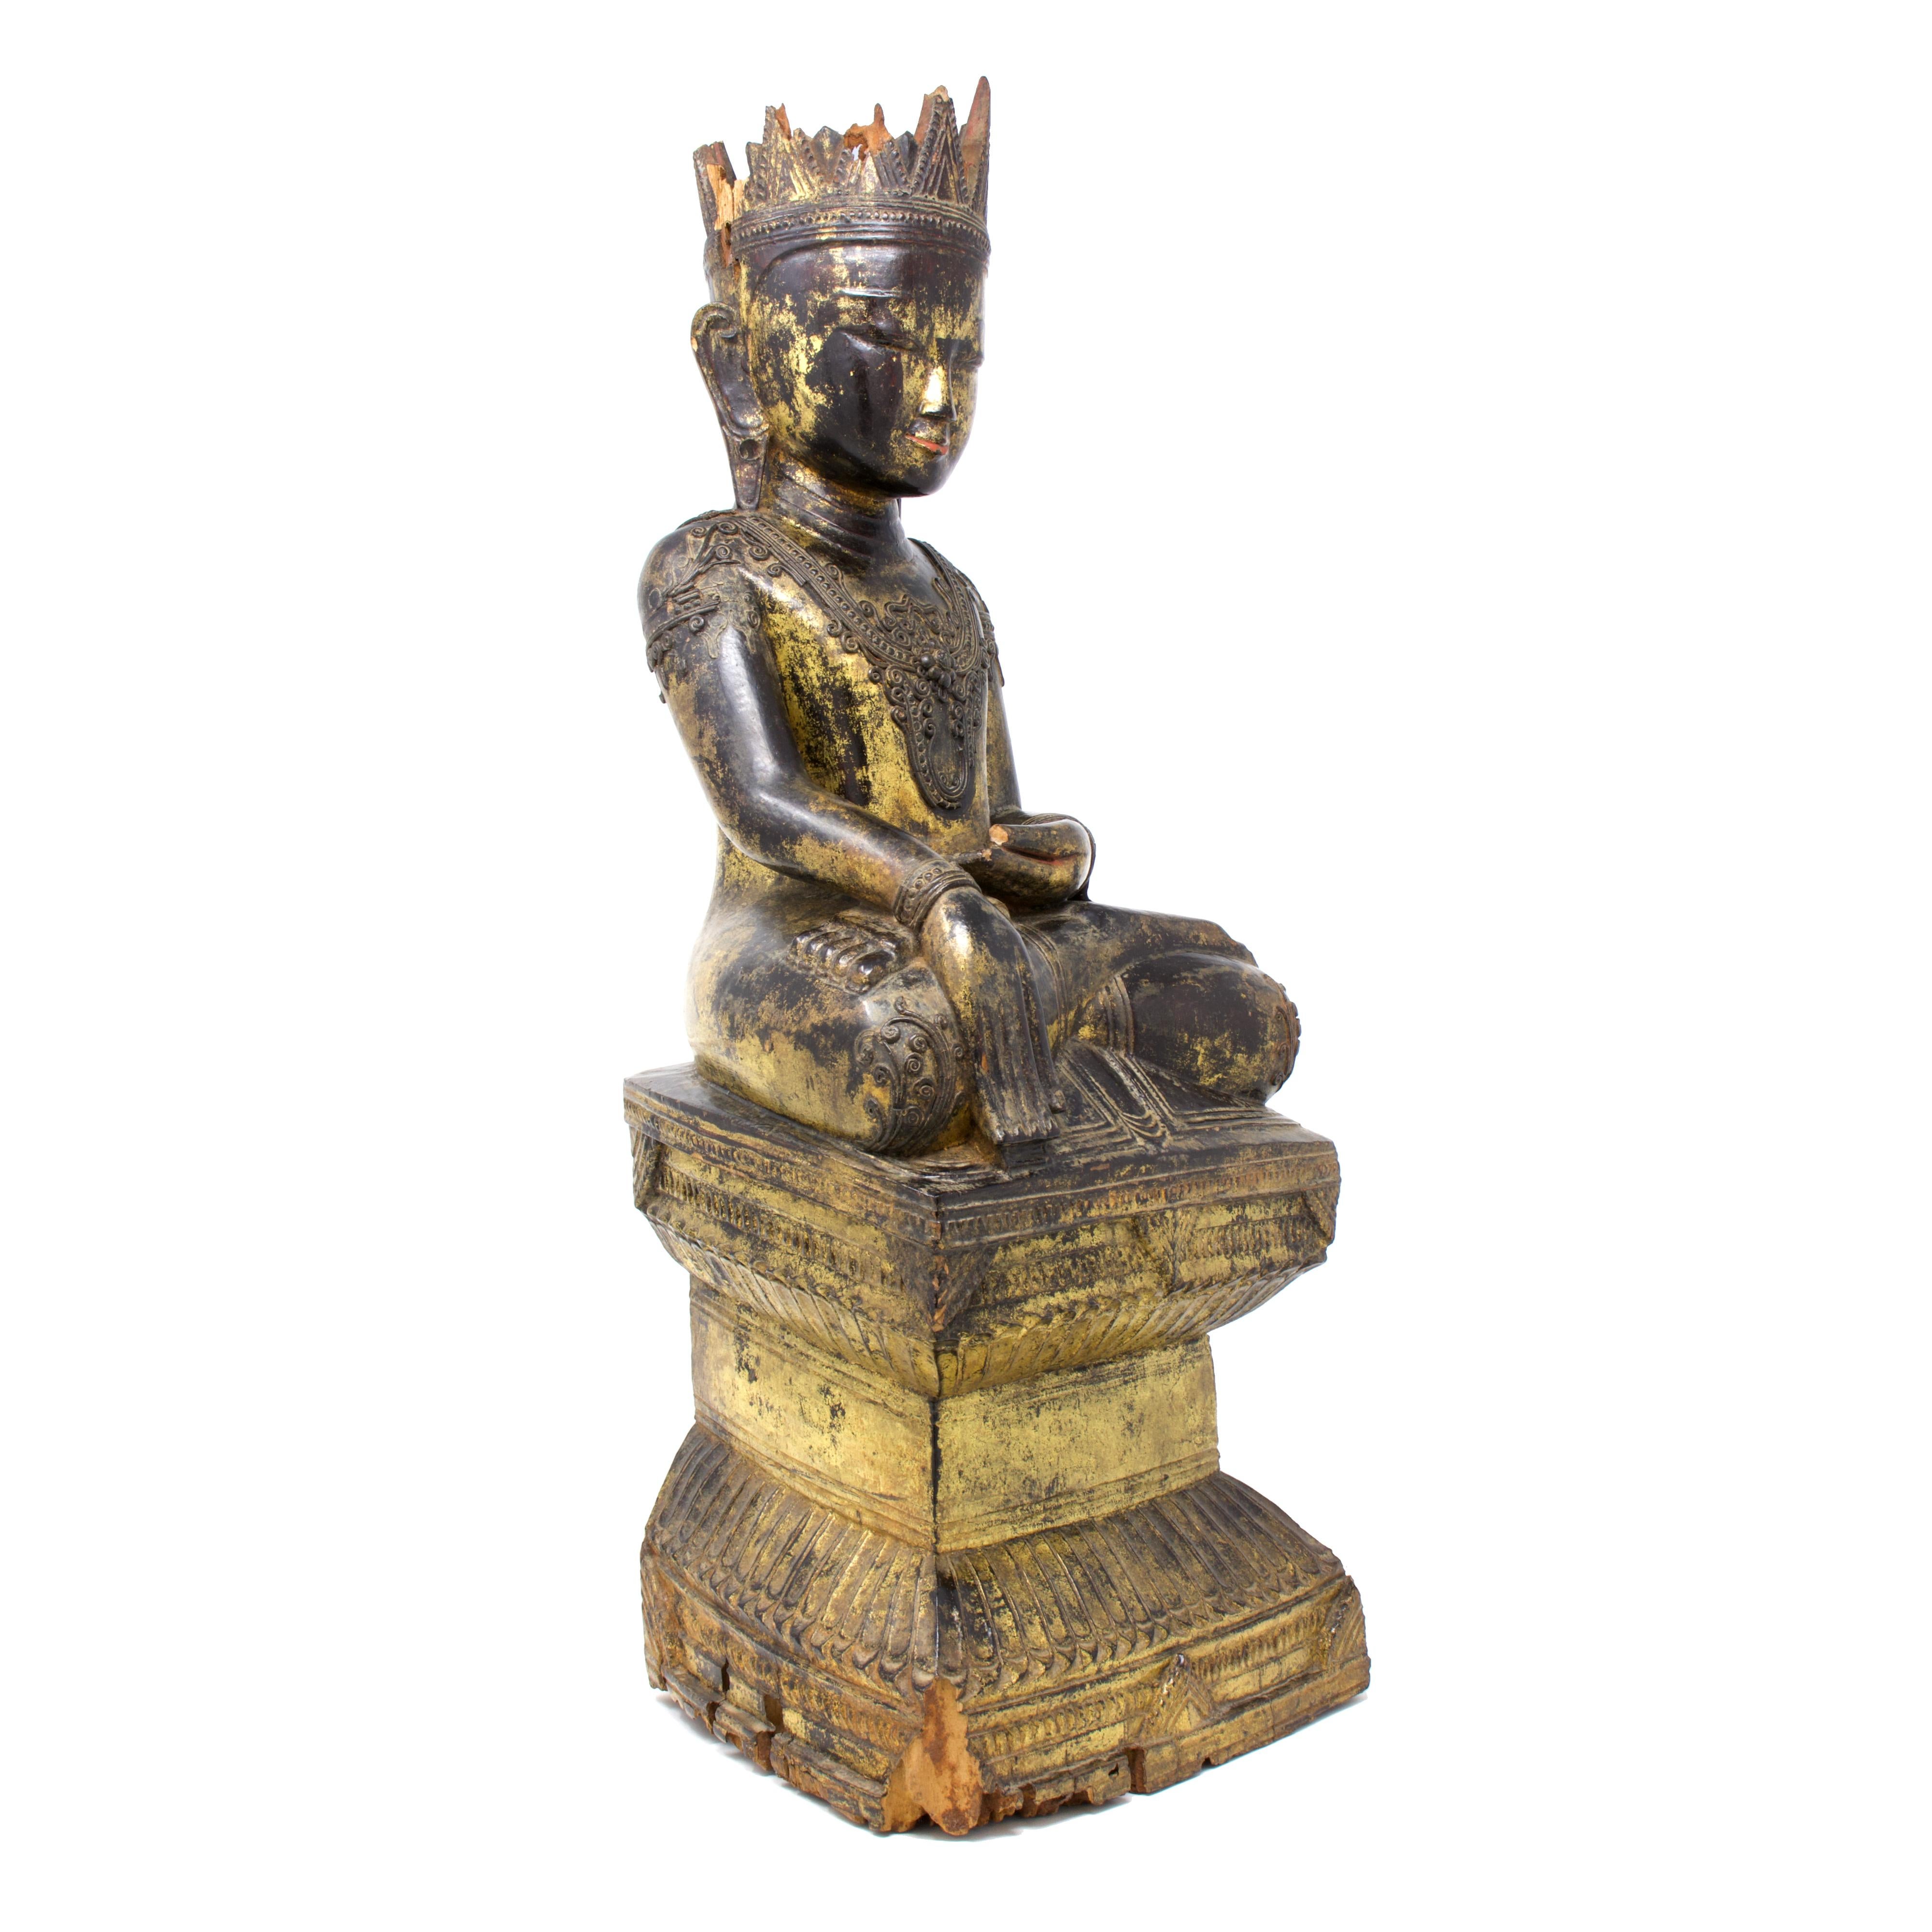 Antique Shan (Tai Yai) Jambupati Buddha Image, wood, lacquer and gold leaf, Konbaung Empire (1752-1885)
A crowned style that displays Northern Thai iconography merged with the aesthetic of Burmese rule in the region. The figure is depicted in the